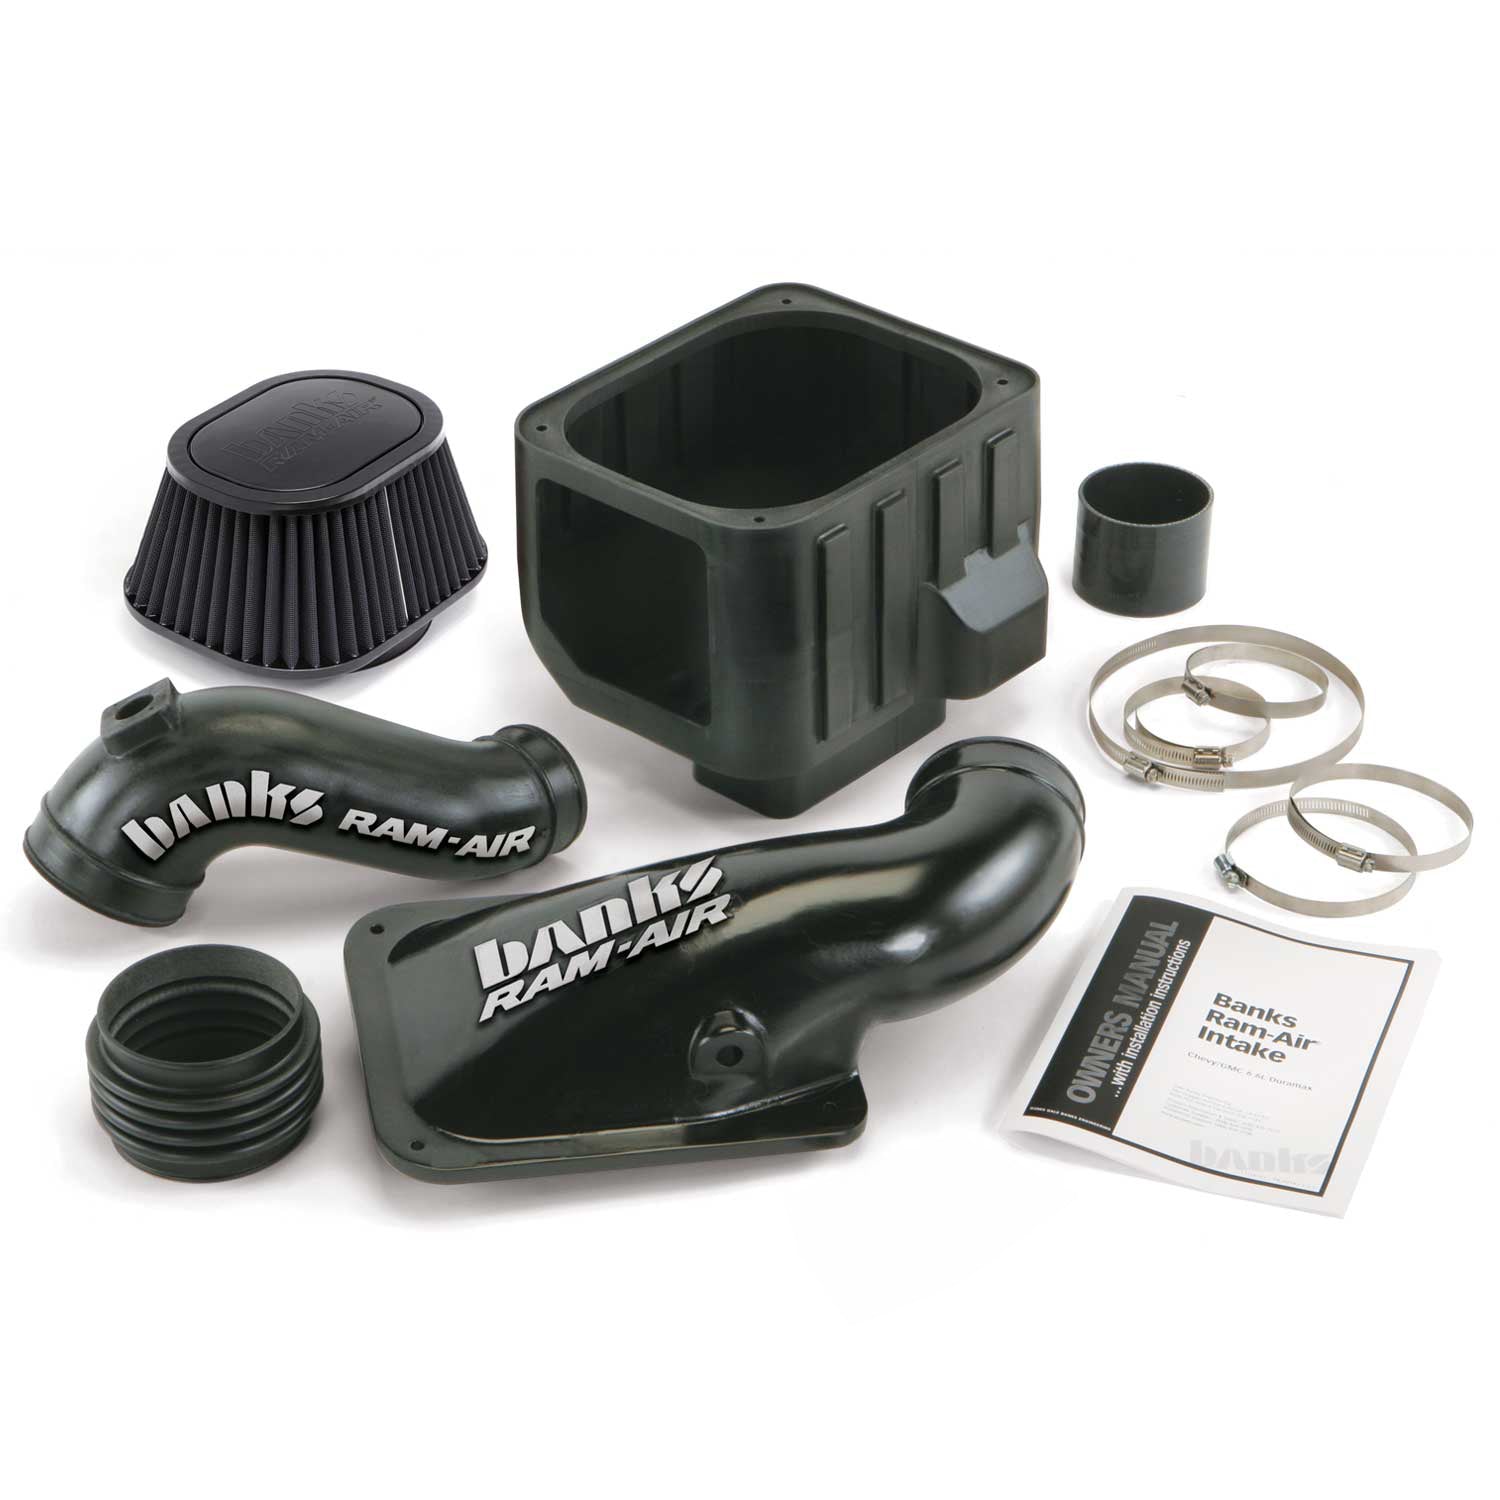 Components of the Banks Ram-Air intake for 2001-2004 6.6L Duramax LB7